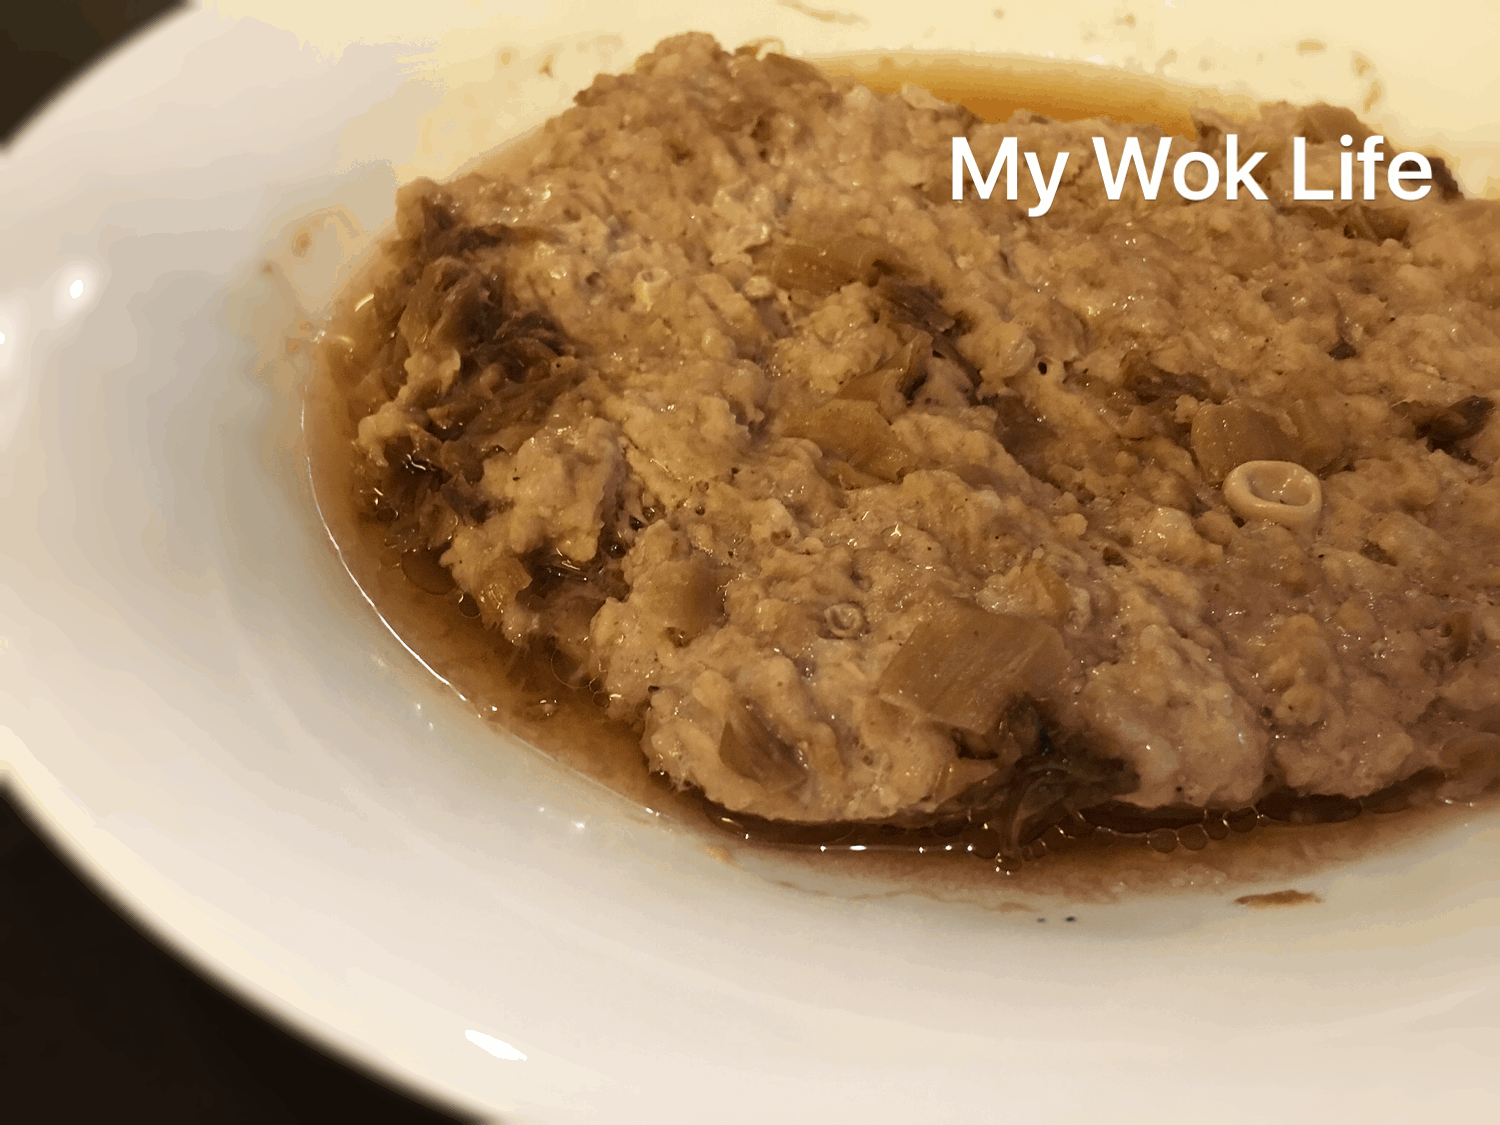 My Wok Life Cooking Blog - Steamed Minced Pork with Mei Cai (Preserved Vegetable) 梅菜蒸肉饼 -